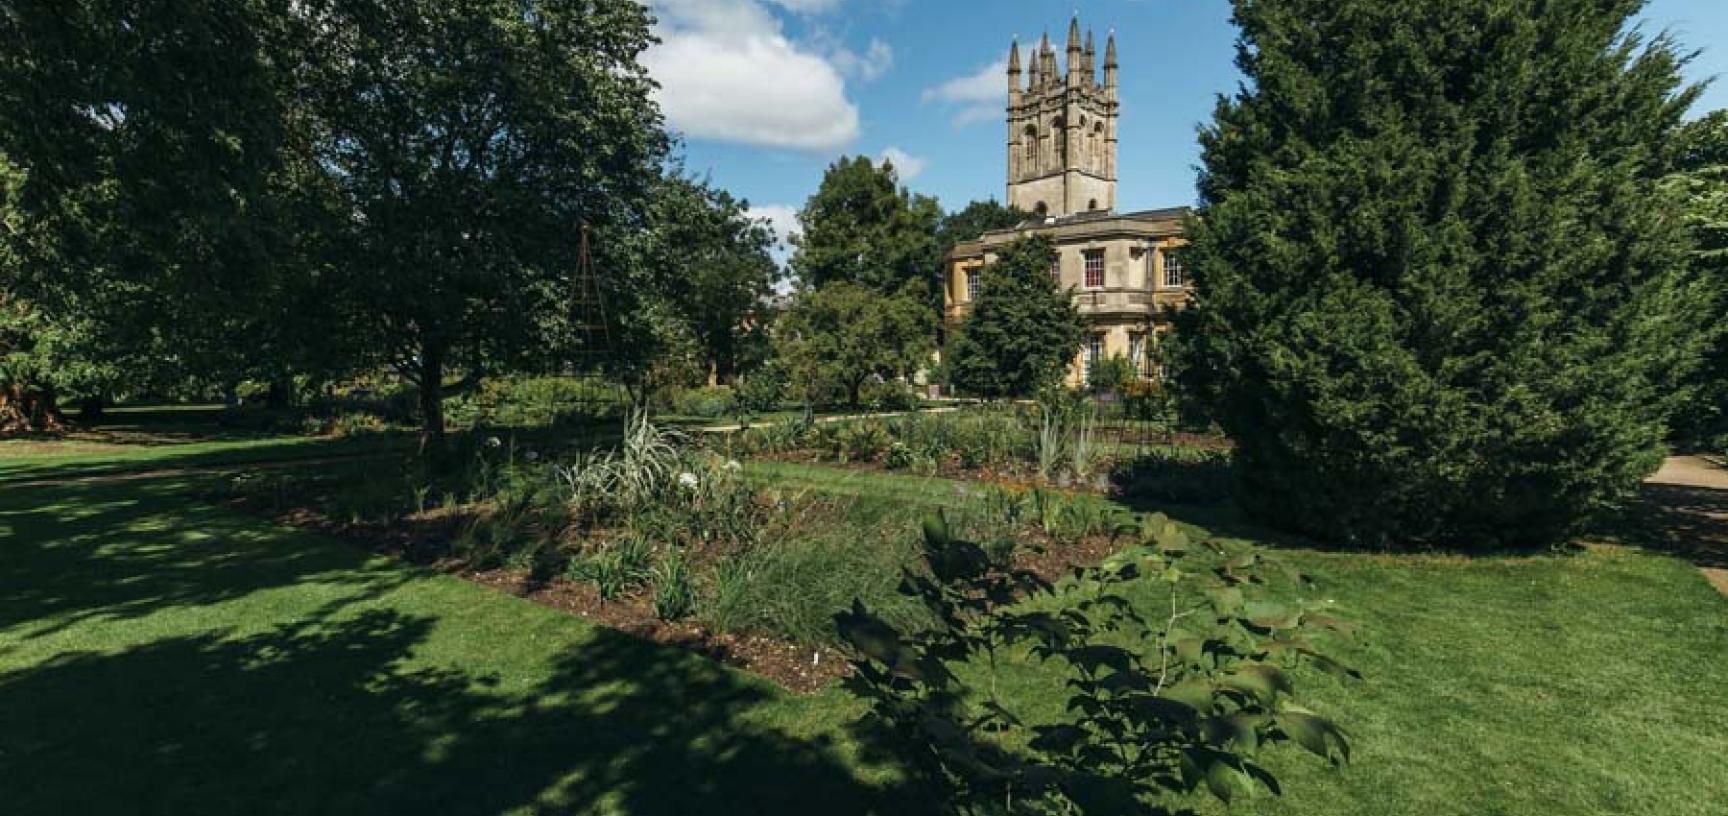 Walled Garden and Magdalen Tower.